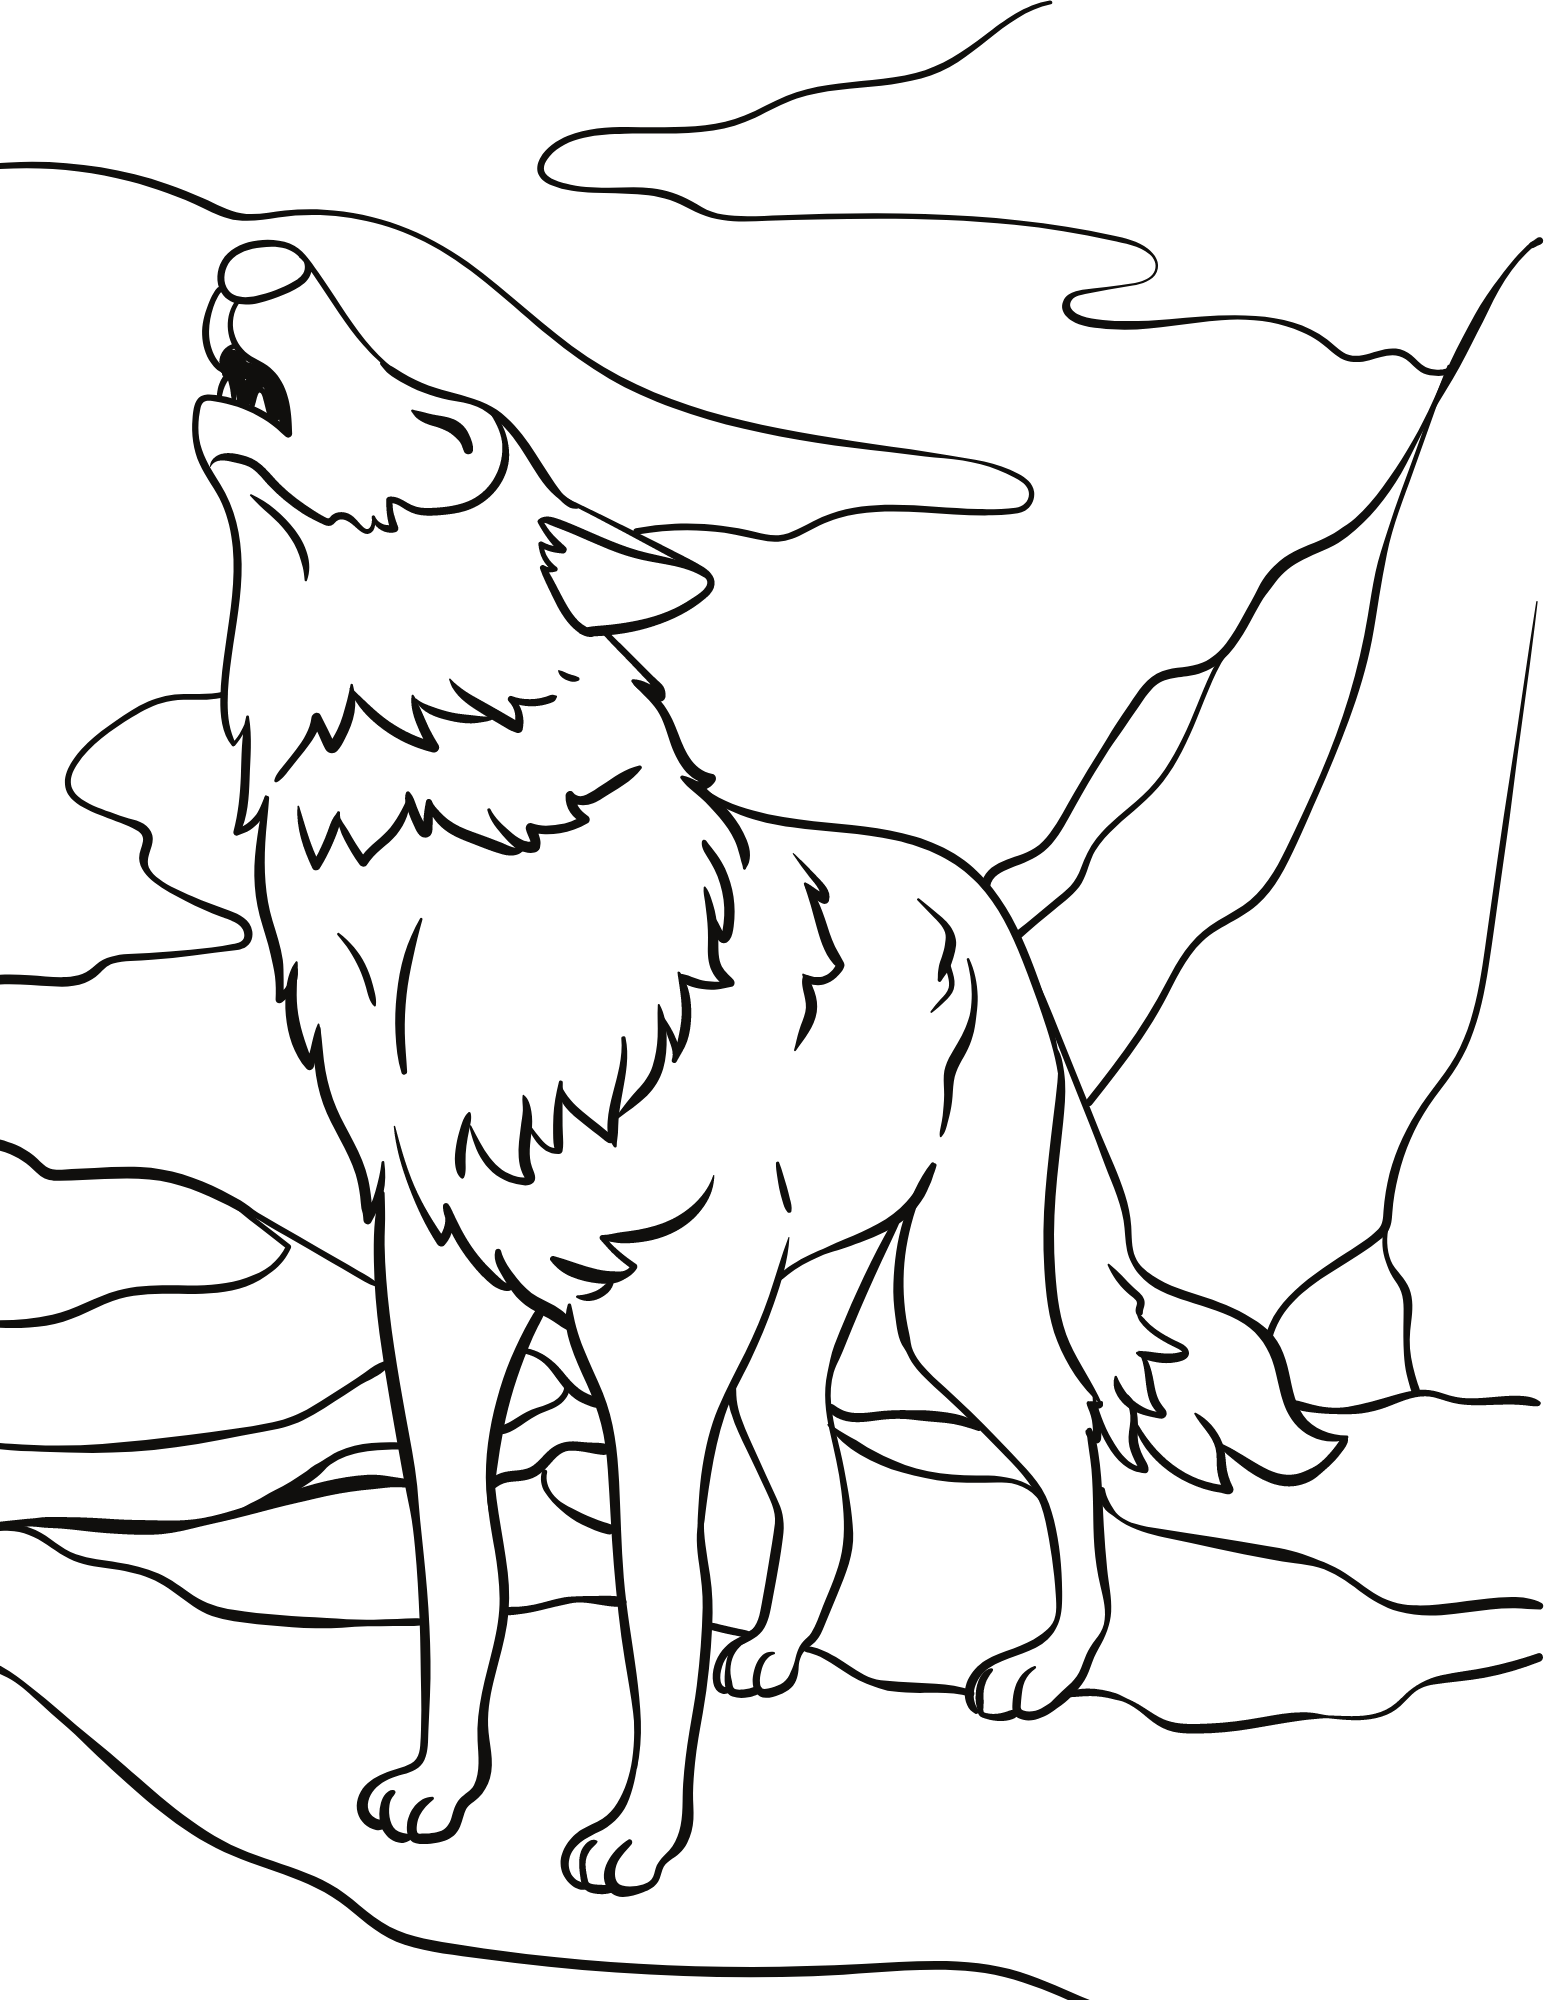 Wild and wonderful wolf coloring pages for kids and adults